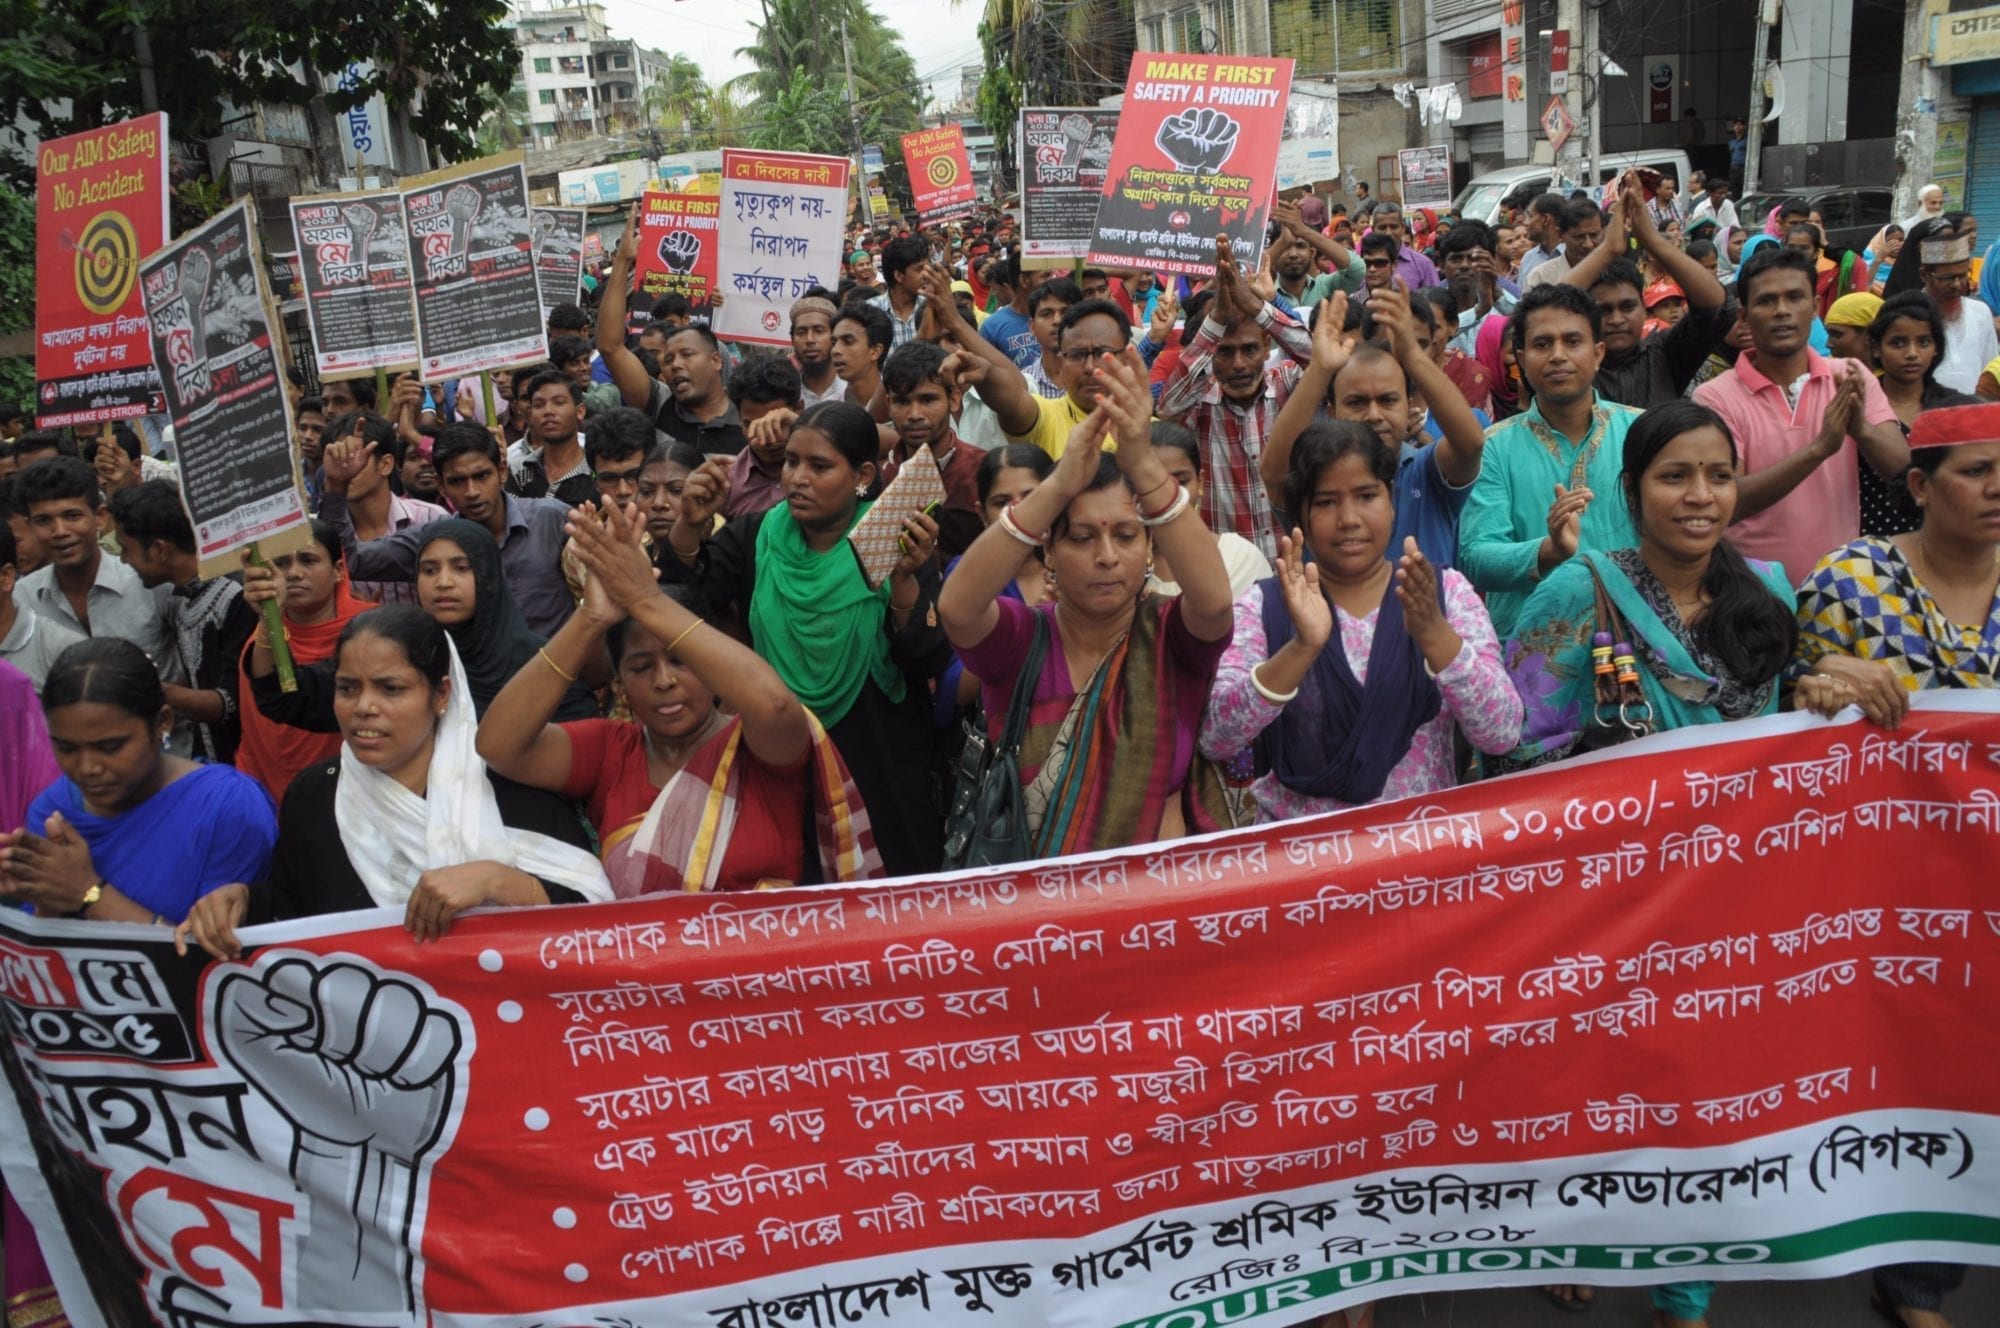 Bangladesh: Campaign to Silence Garment Workers